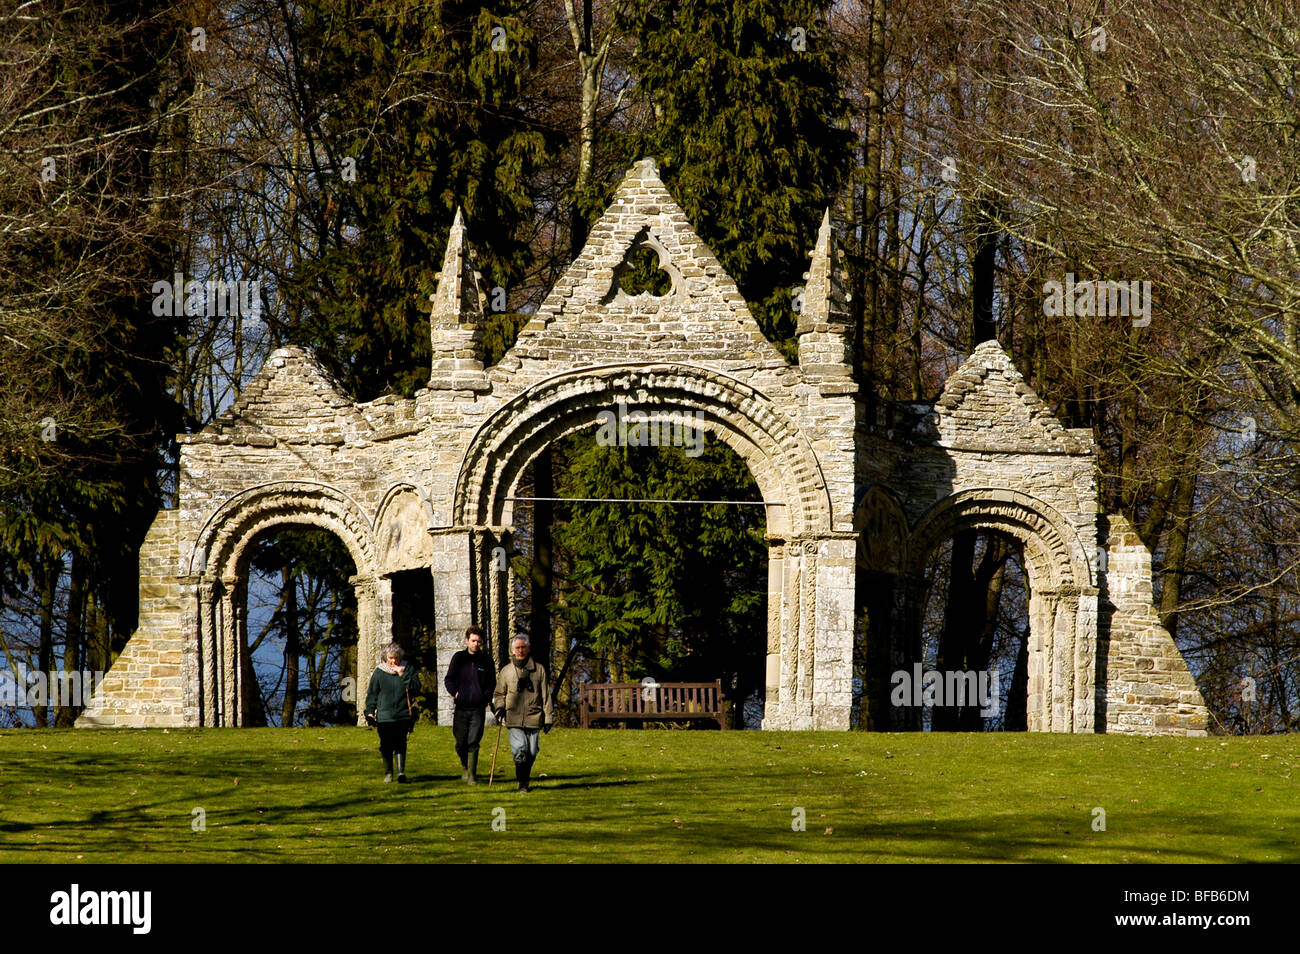 The remains of the Shobdon Arches, Hereford England Stock Photo